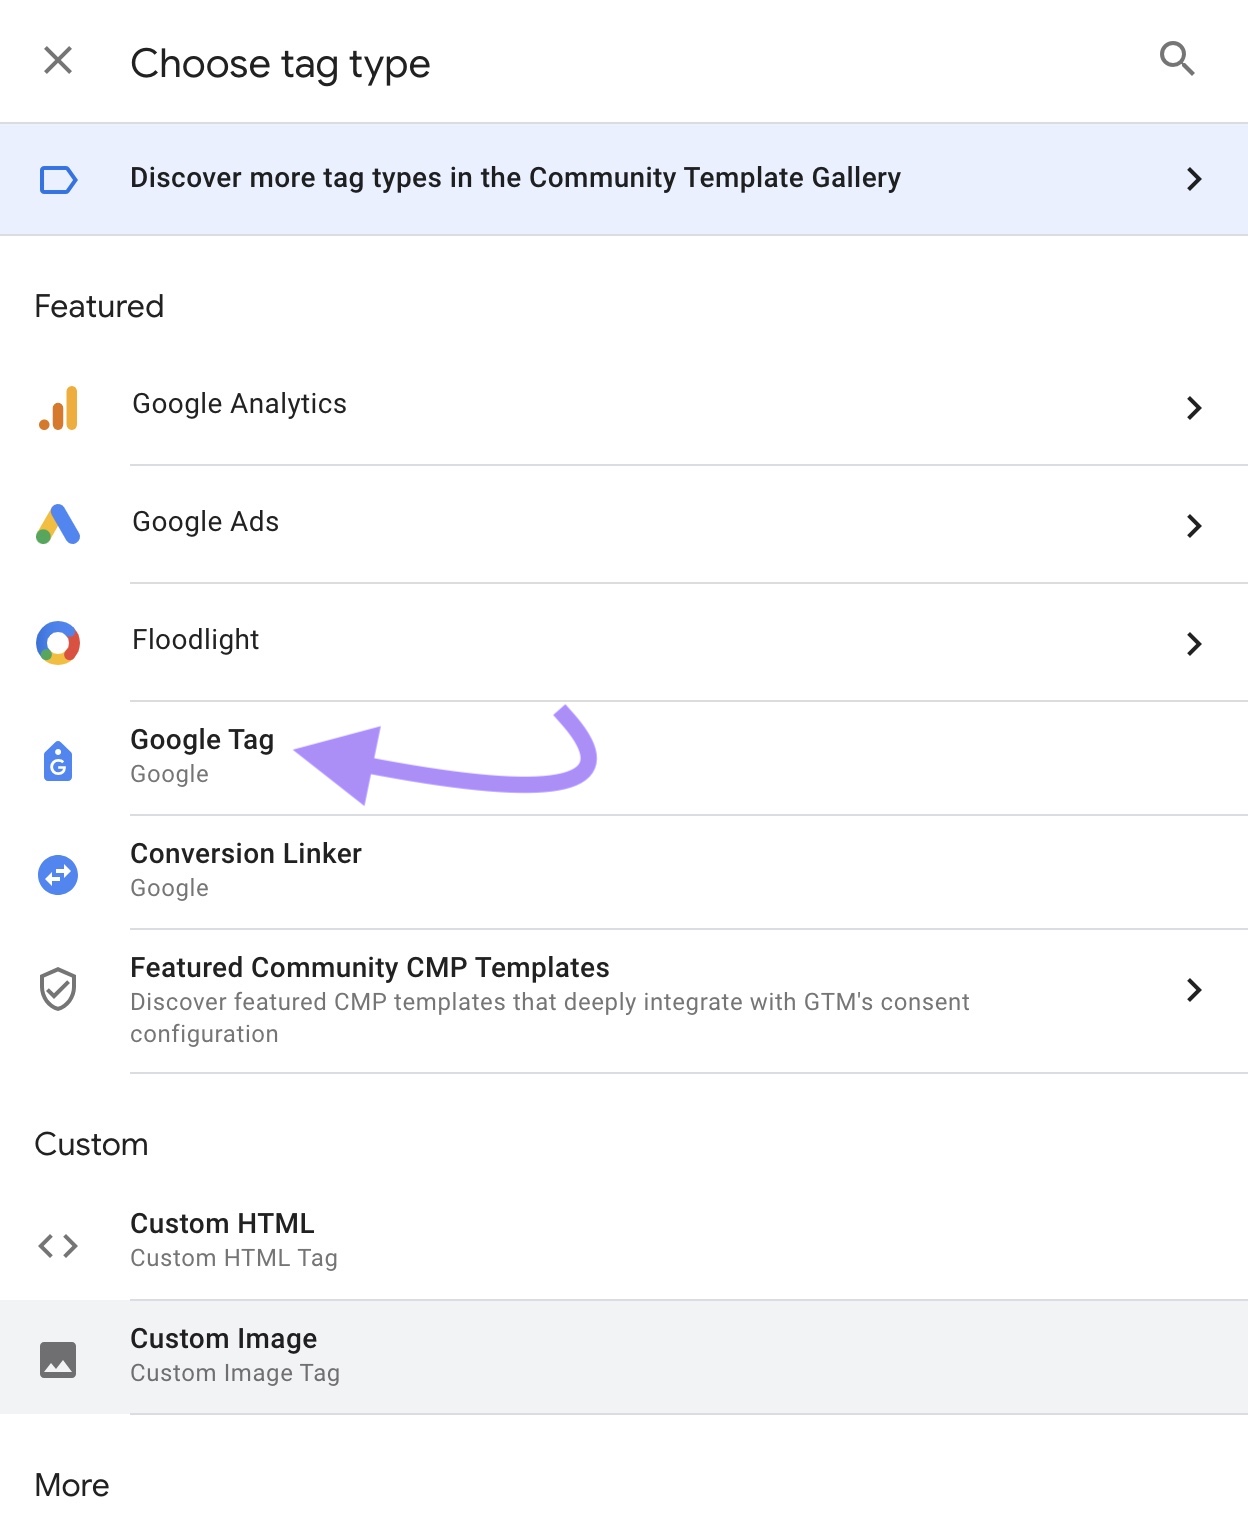 "Google Tag" option selected under the “Choose tag type” window